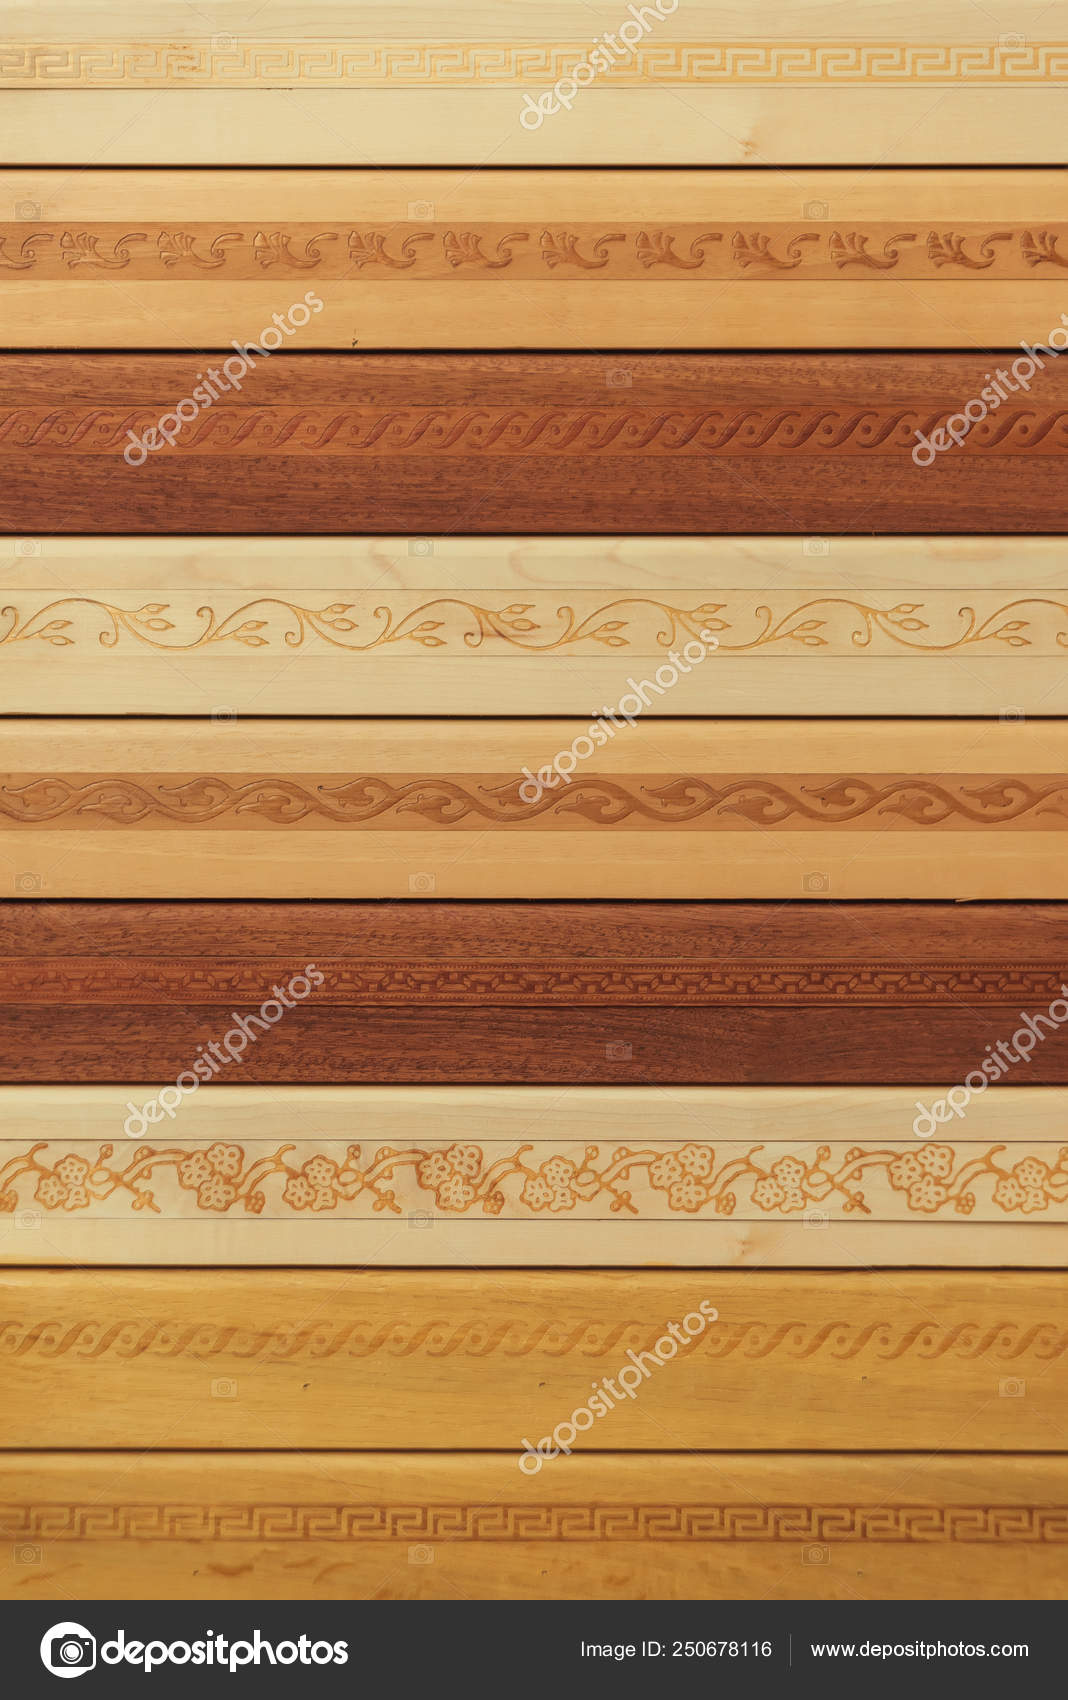 Wooden Skirting Boards Ceiling Ornaments Drawings Wooden